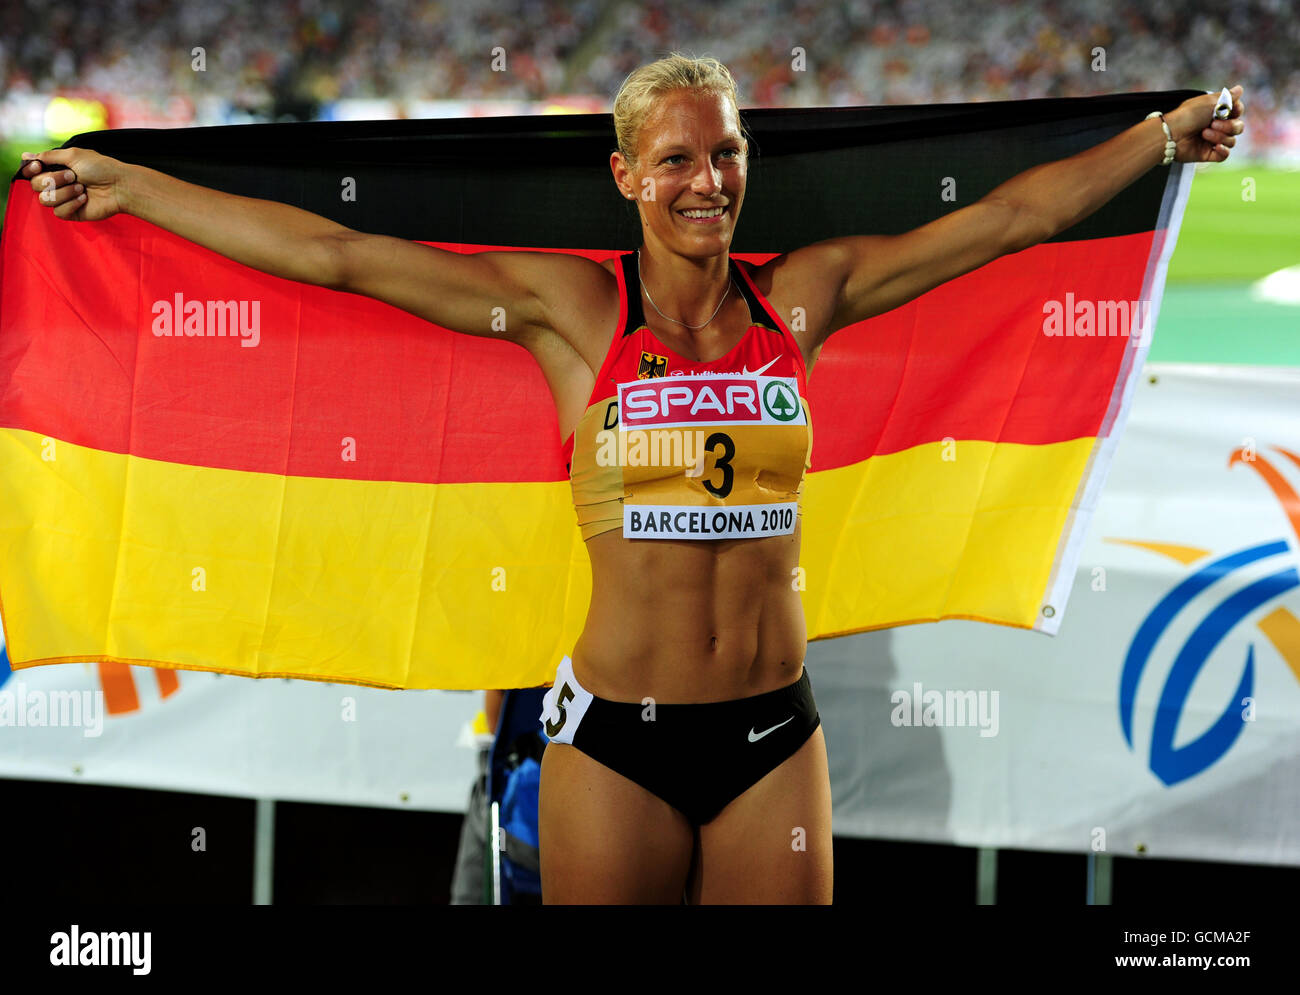 Athletics - IAAF European Championships 2010 - Day Five - Olympic Stadium. Germany's Jennifer Oeser celebrates after winning the bronze medal during the Women's heptathlon Stock Photo